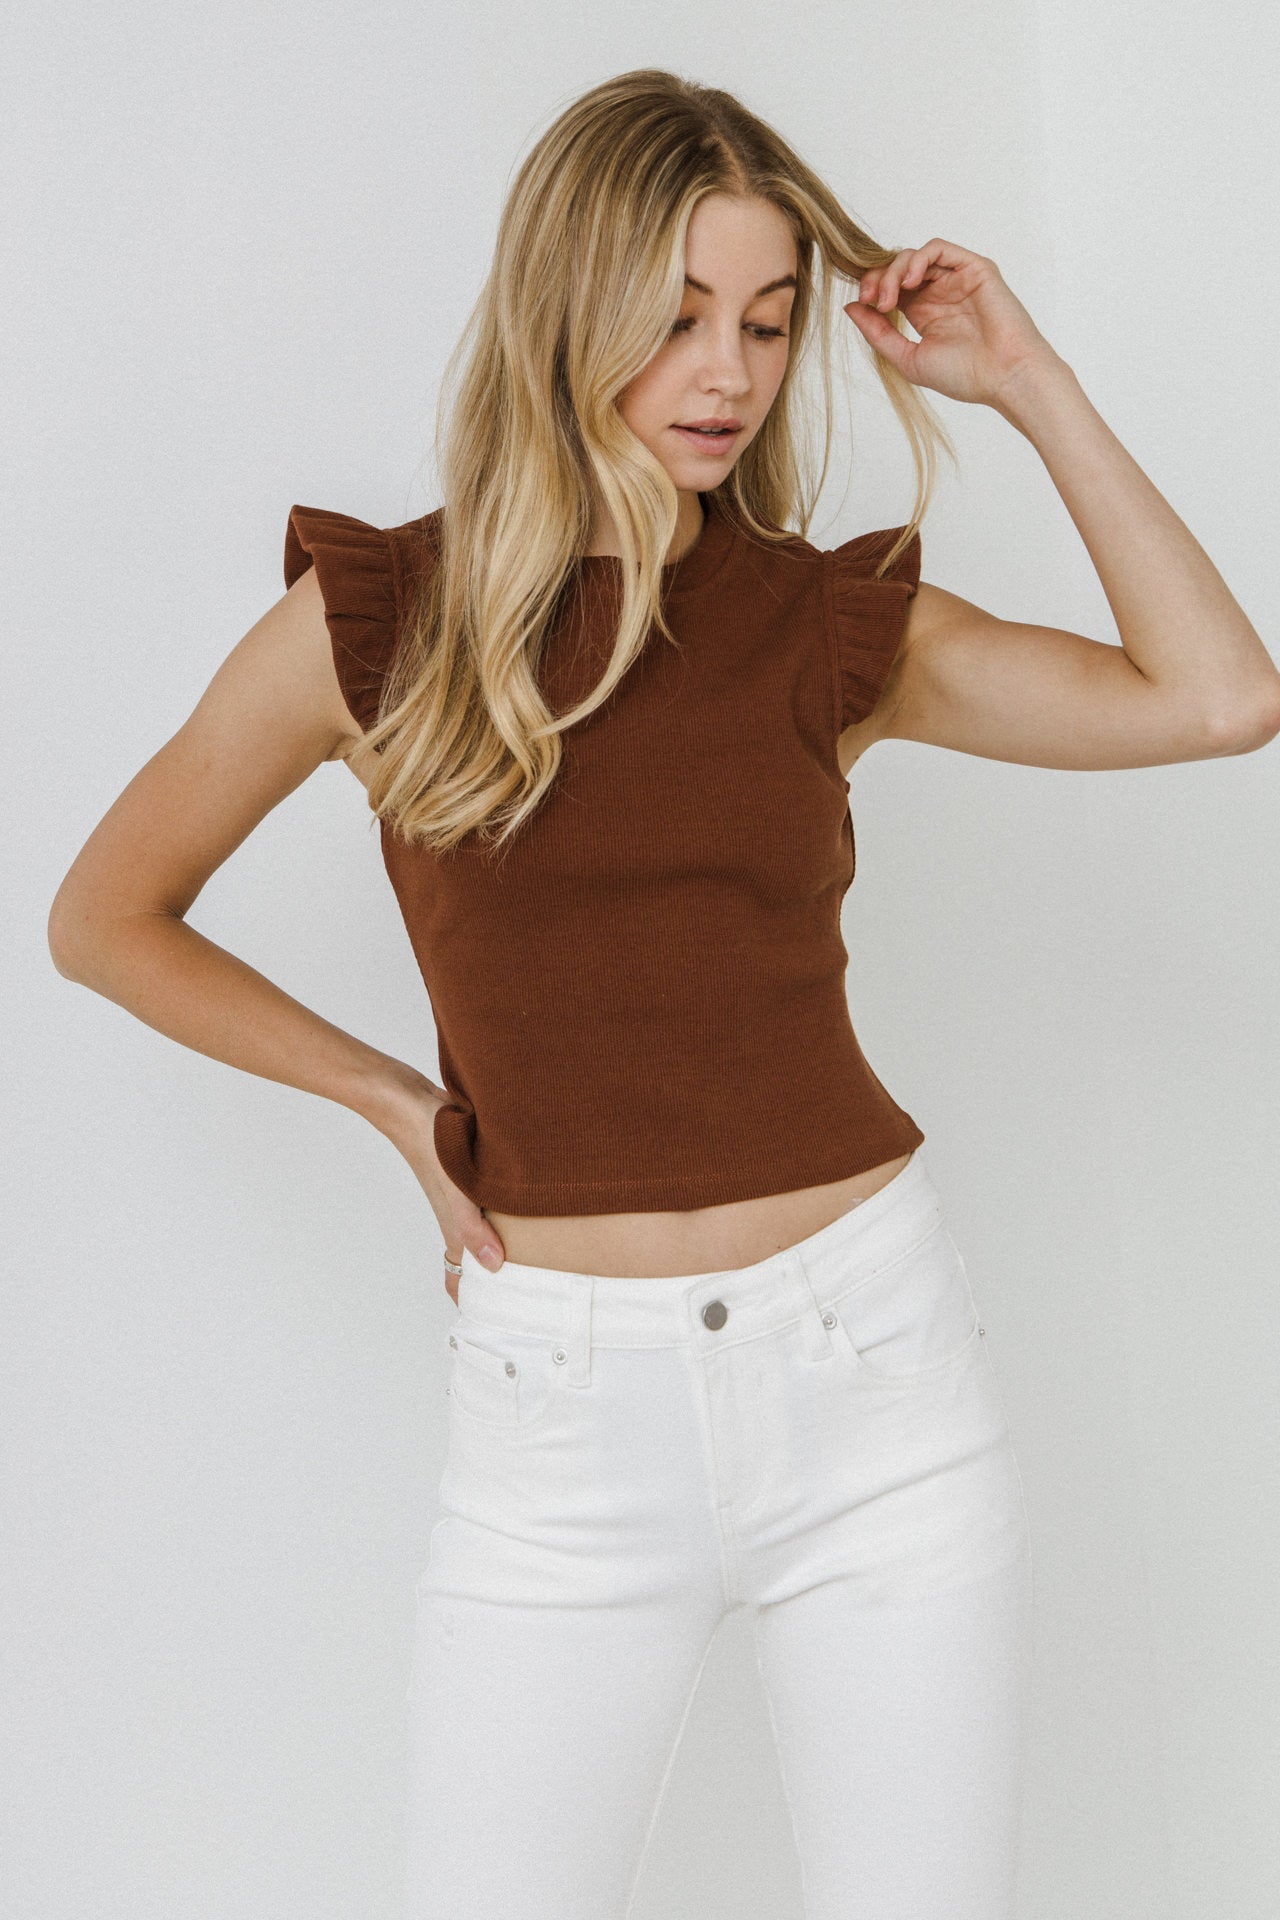 FREE THE ROSES - Ruffle Detail Knit Top - TOPS available at Objectrare